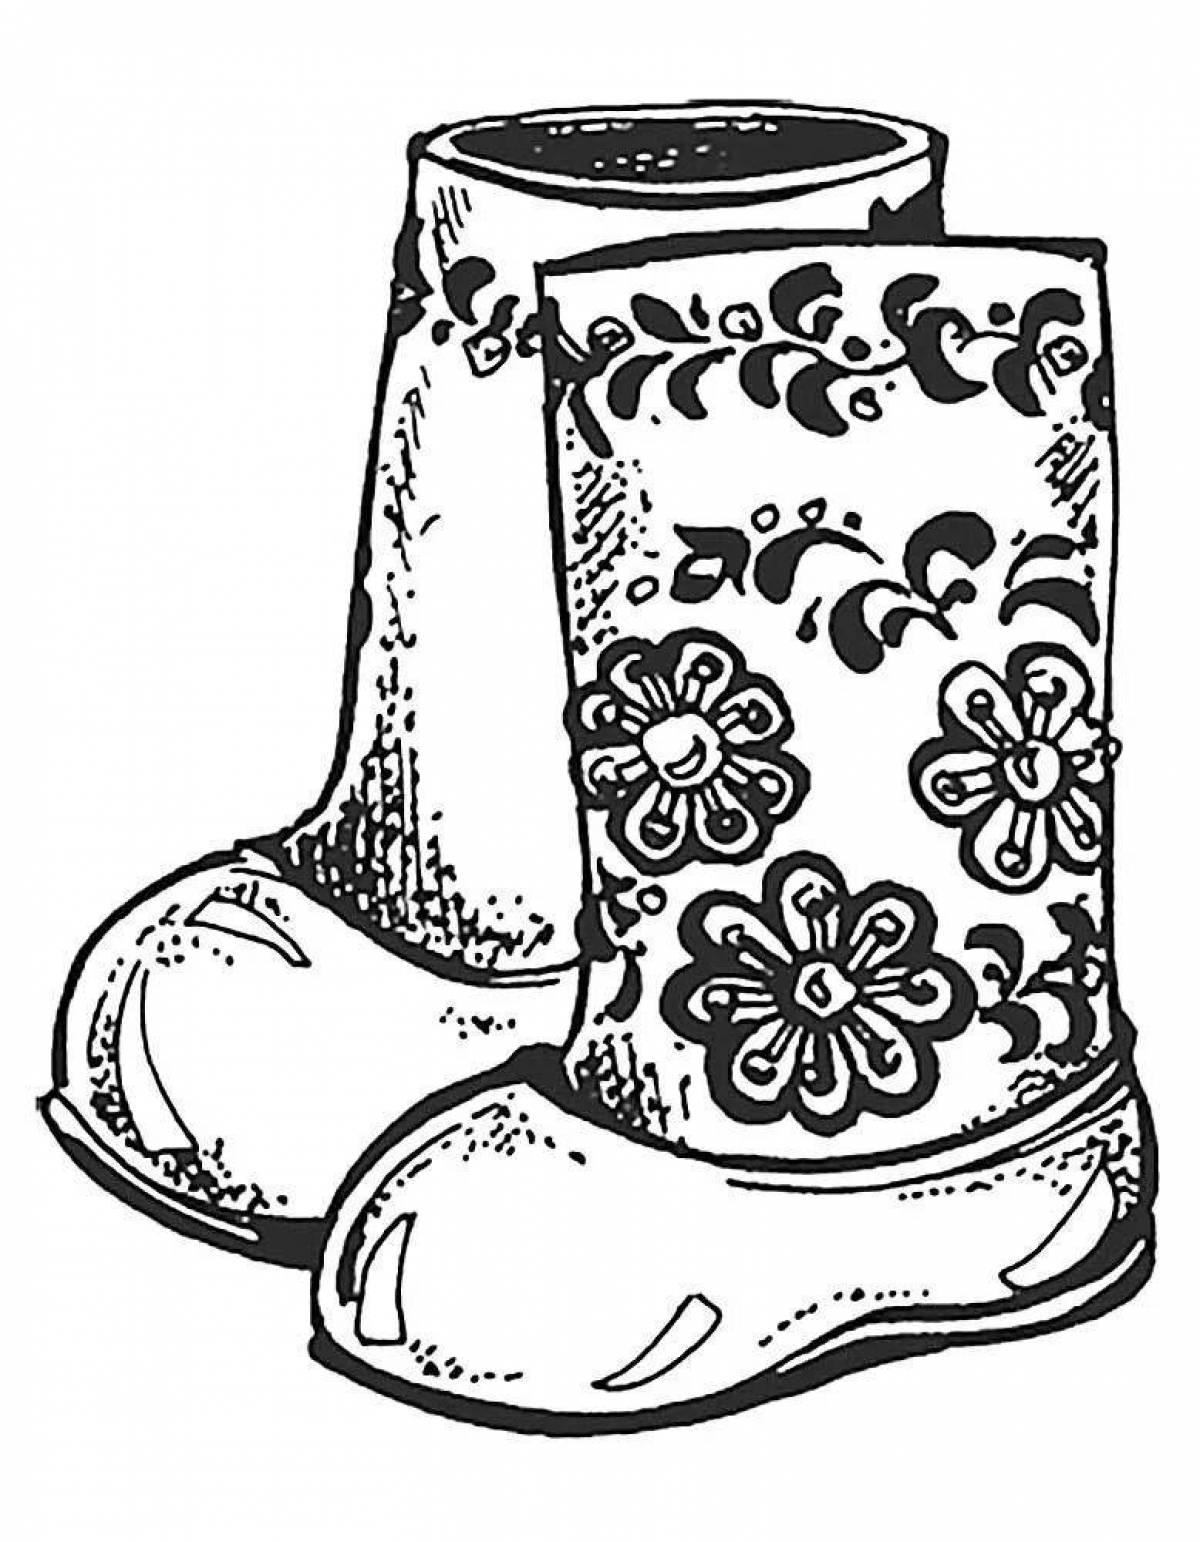 Fabulous boots coloring page